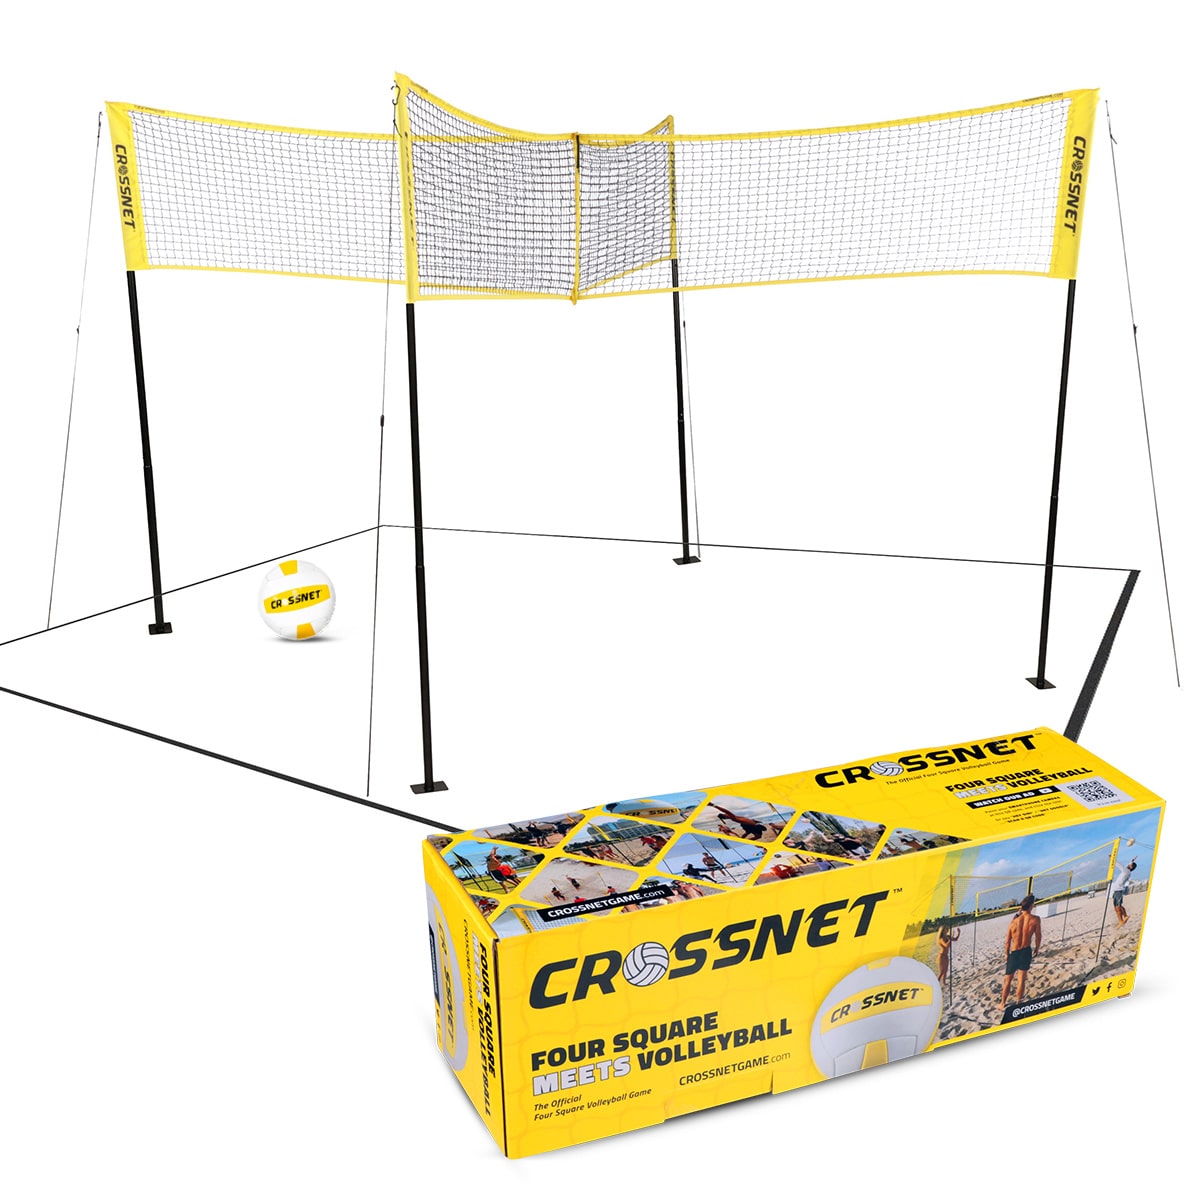 CROSSNET Four Square Volleyball Net Shop Direct